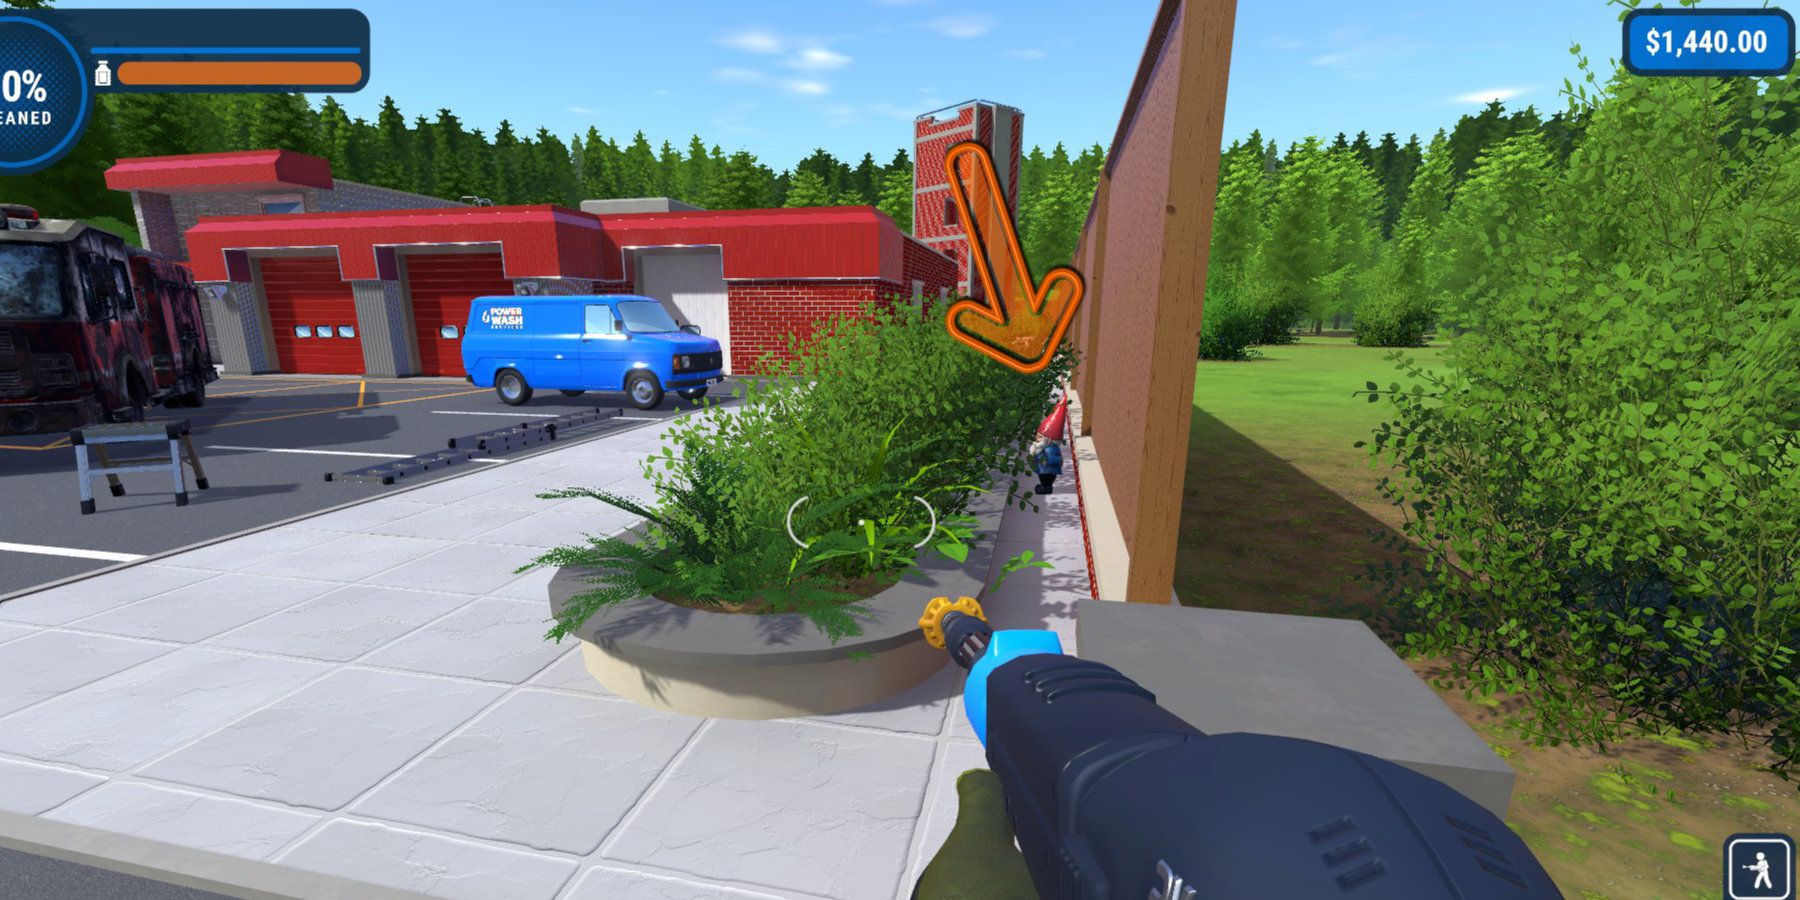 A garden gnome hiding behind the bushes of a fire station, highlighted by an arrow.